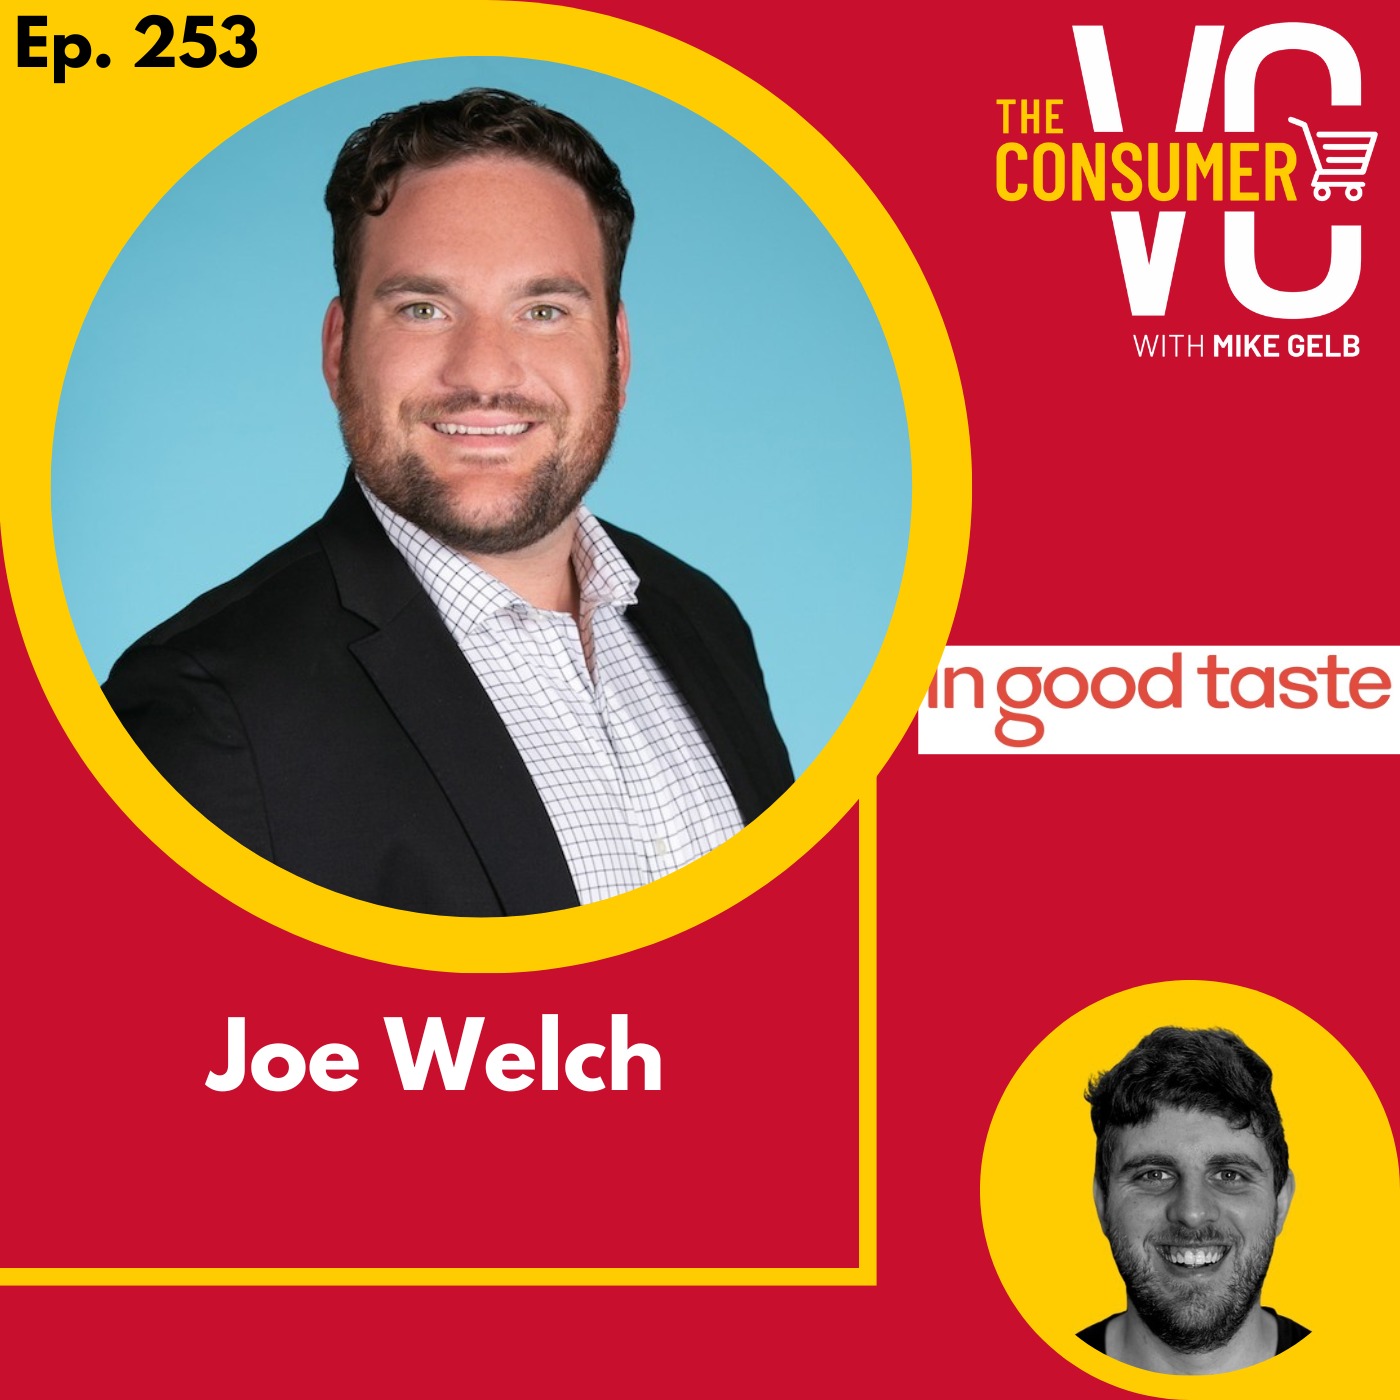 Joe Welch (In Good Taste) – How you can make money in wine and why he left tech to found a beverage company